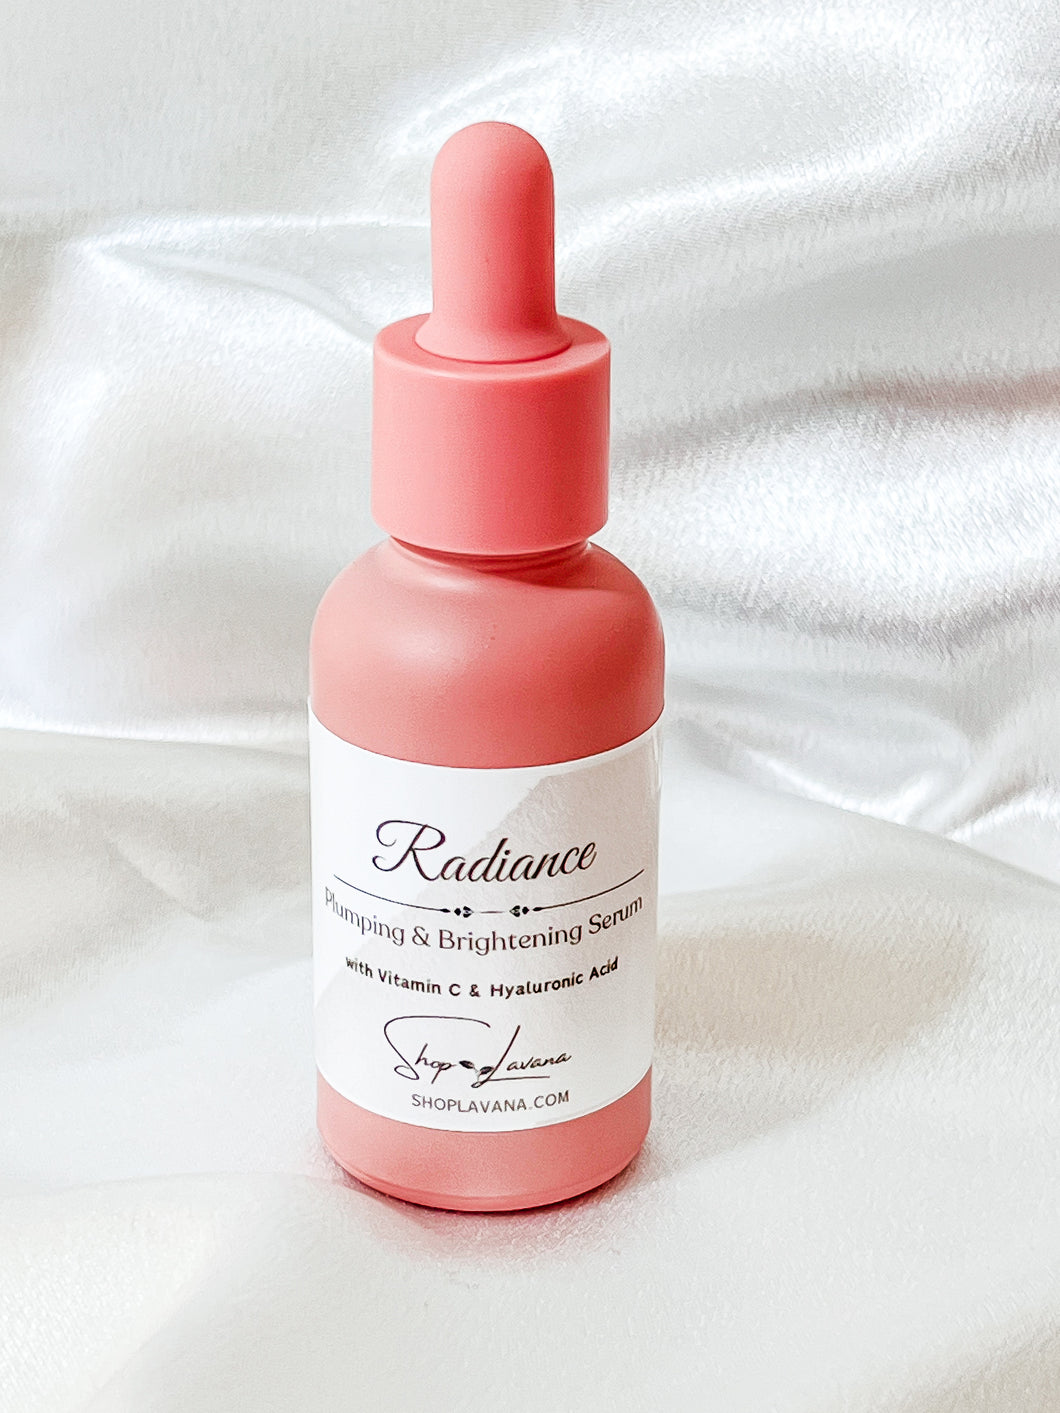 Radiance Facial Serum with Vitamin C & Hyaluronic Acid